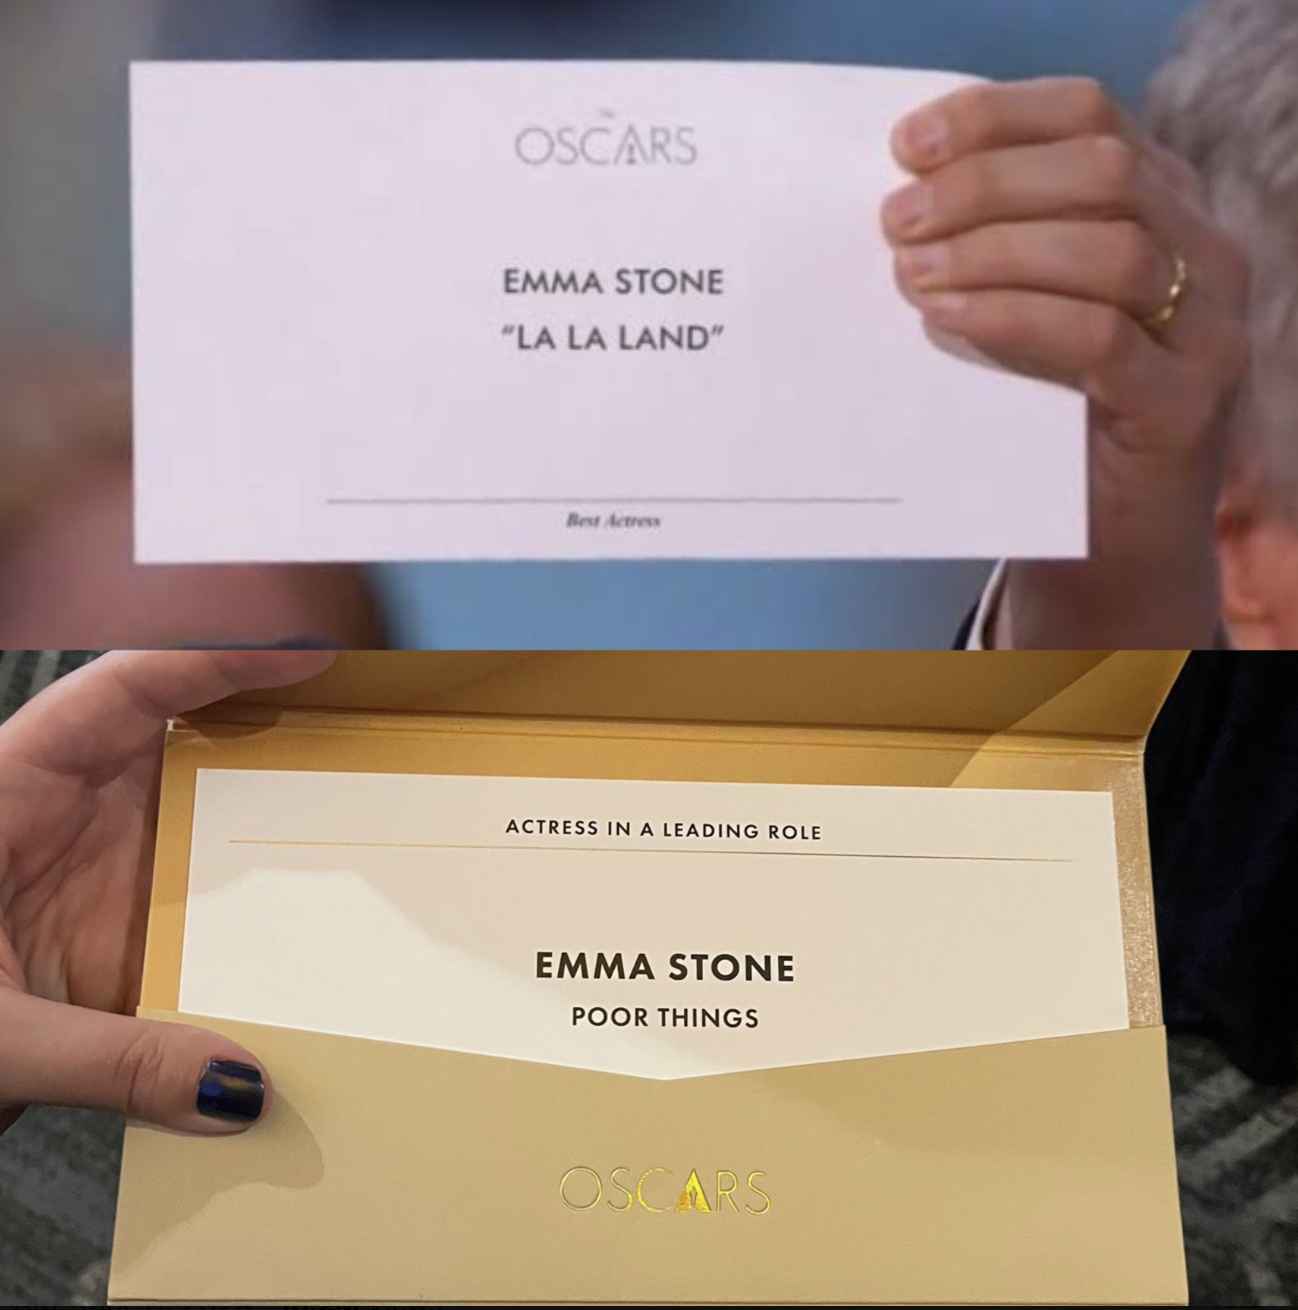 Two hands holding an Oscar envelope for &quot;Actress in a Leading Role&quot; with &quot;Emma Stone&quot; and &quot;Poor Things&quot; written inside